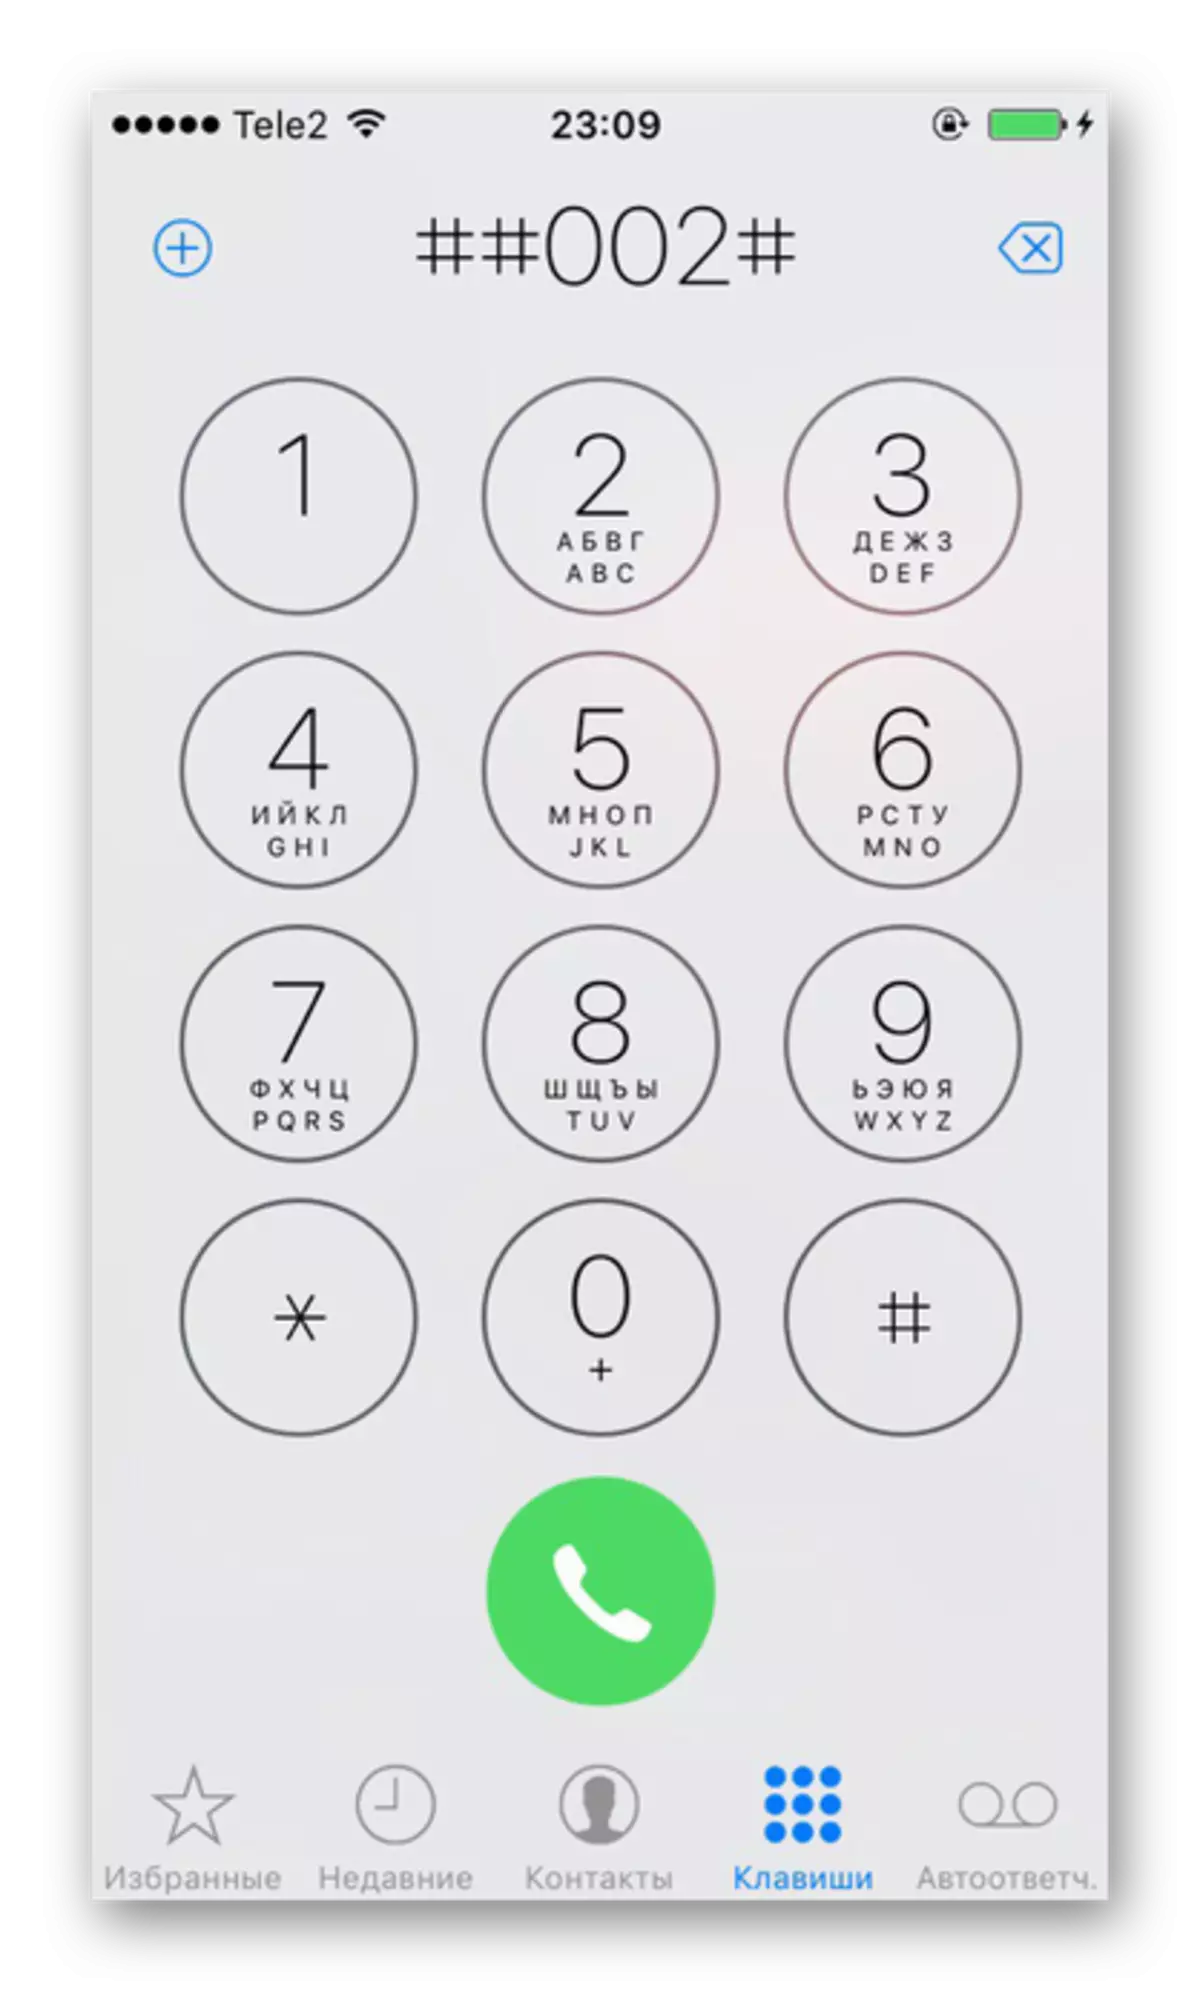 A set of system command to disable the answering machine on the iPhone